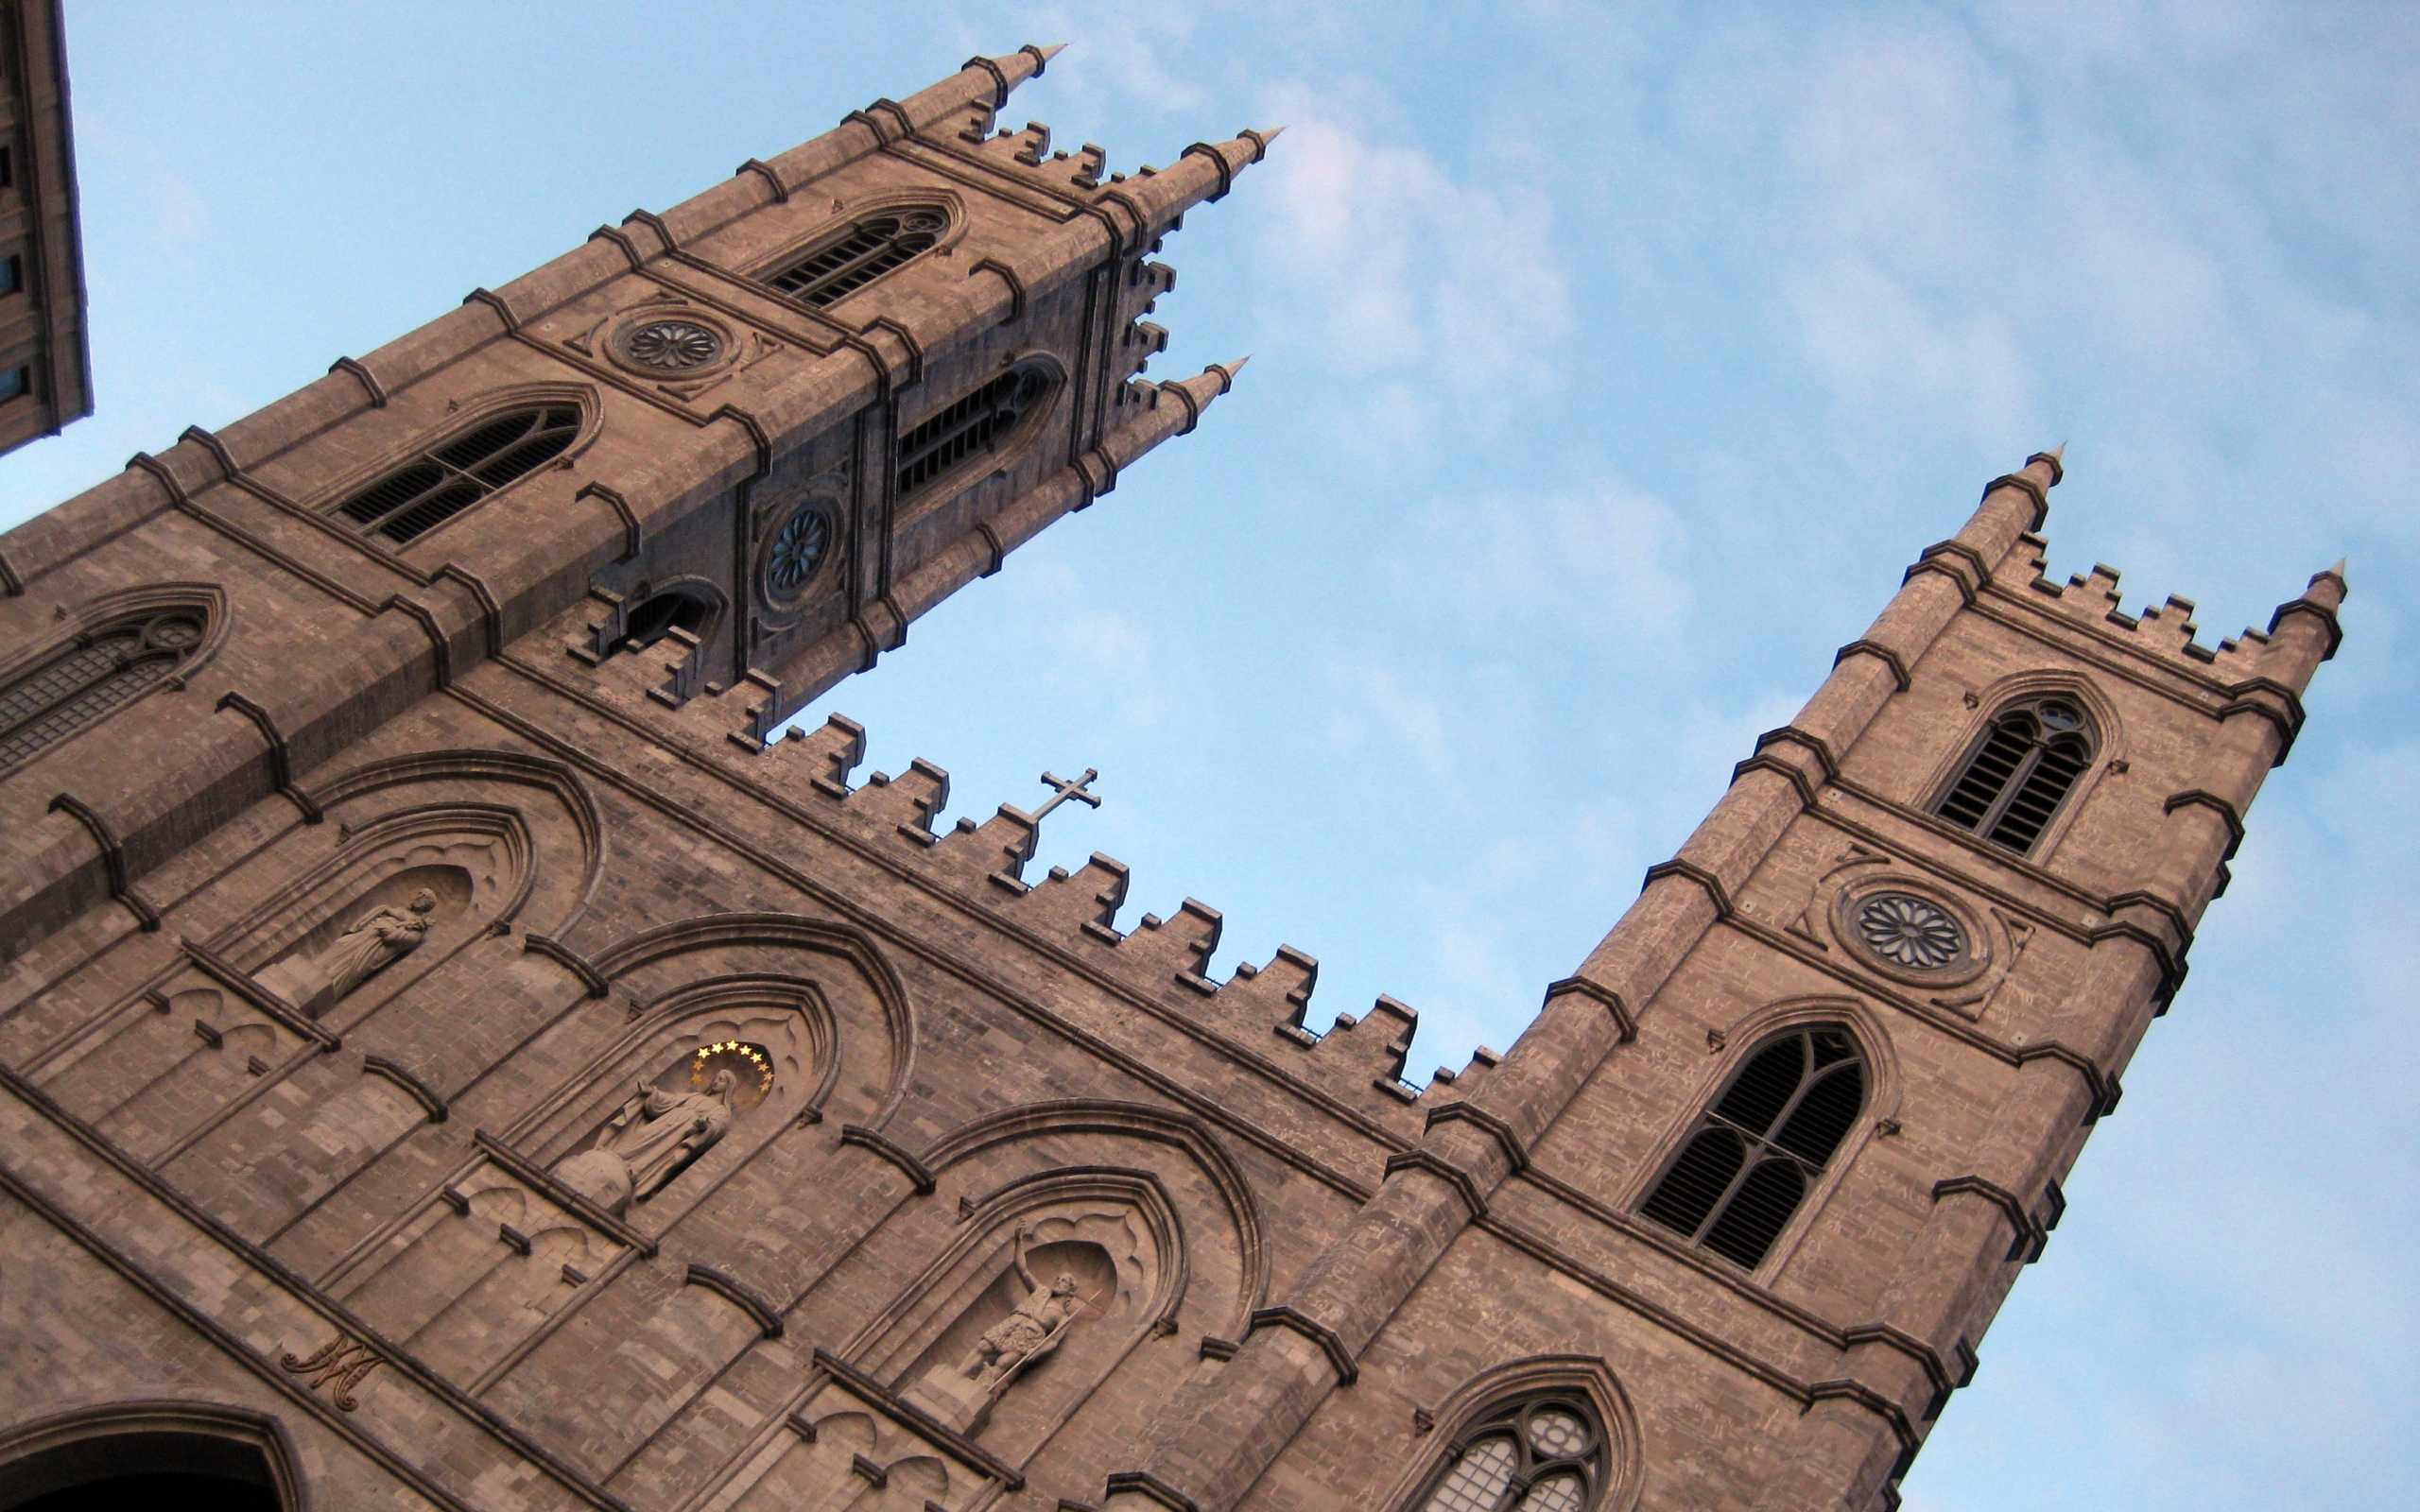 Notre-Dame Basilica (Montreal) Wallpapers